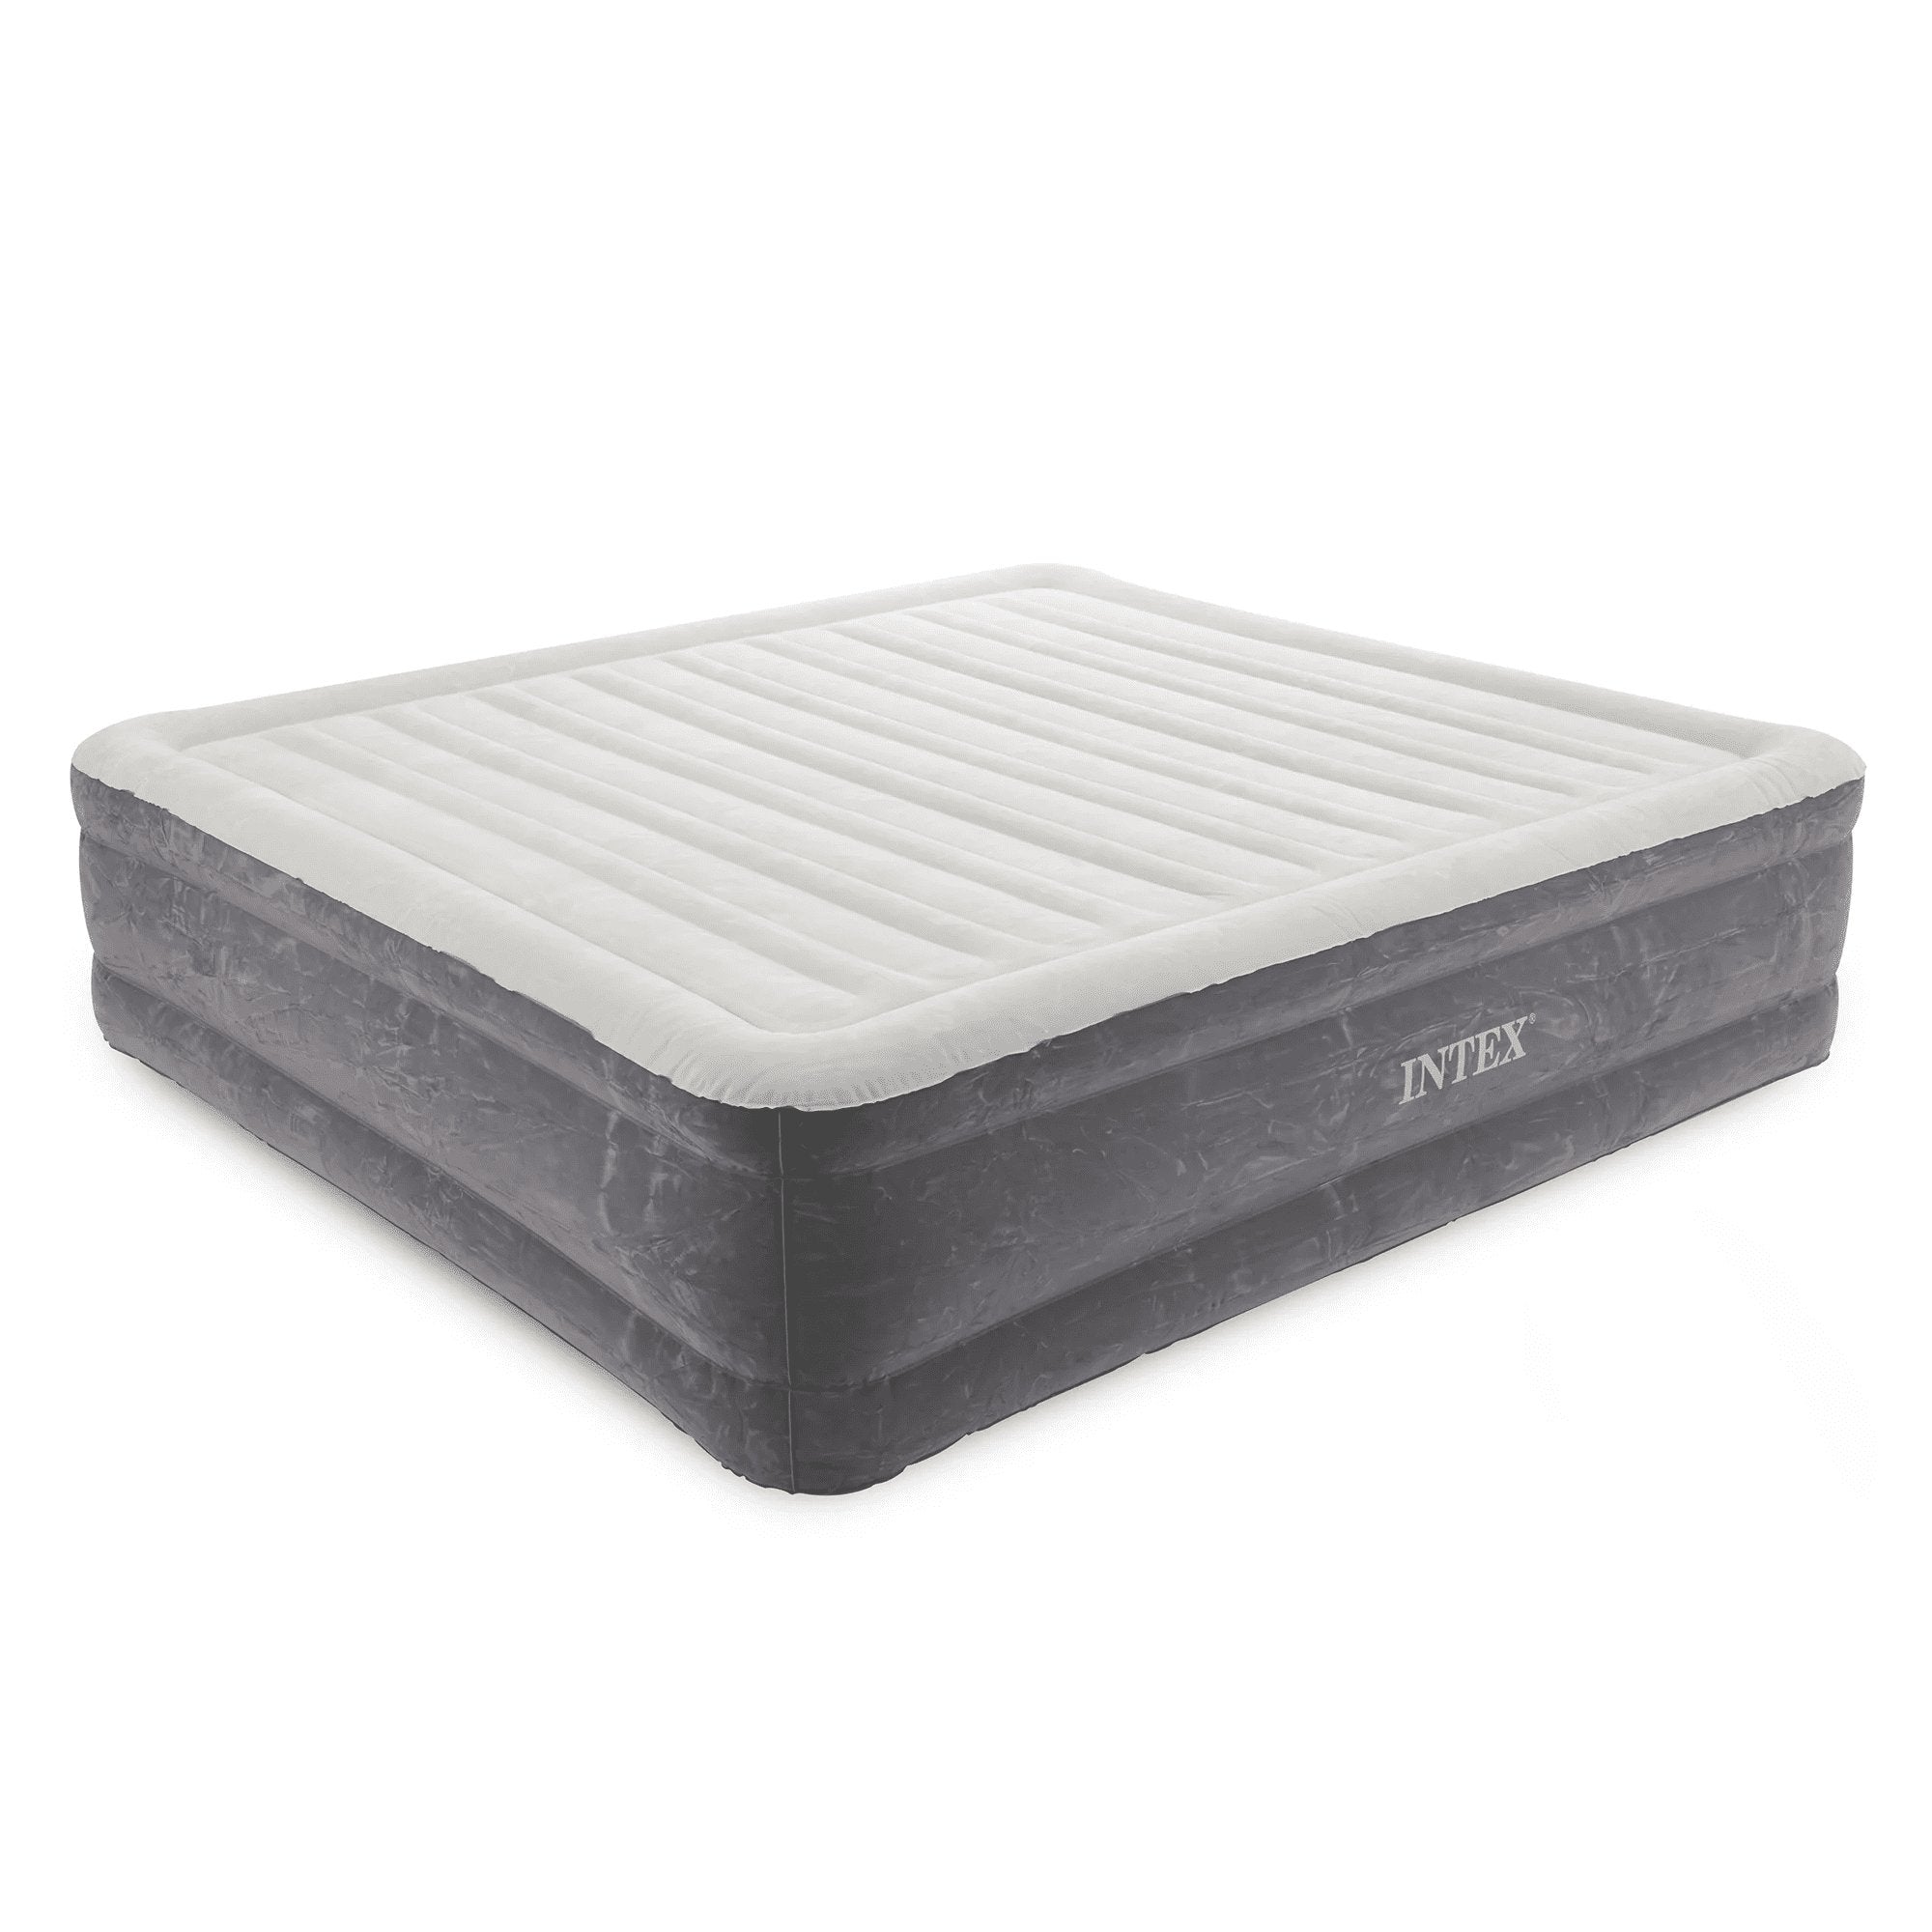 Intex 64409ST 18-inch Inflatable Elevated Premium Comfort Airbed w/Built-In Pump, King - Lucaneo